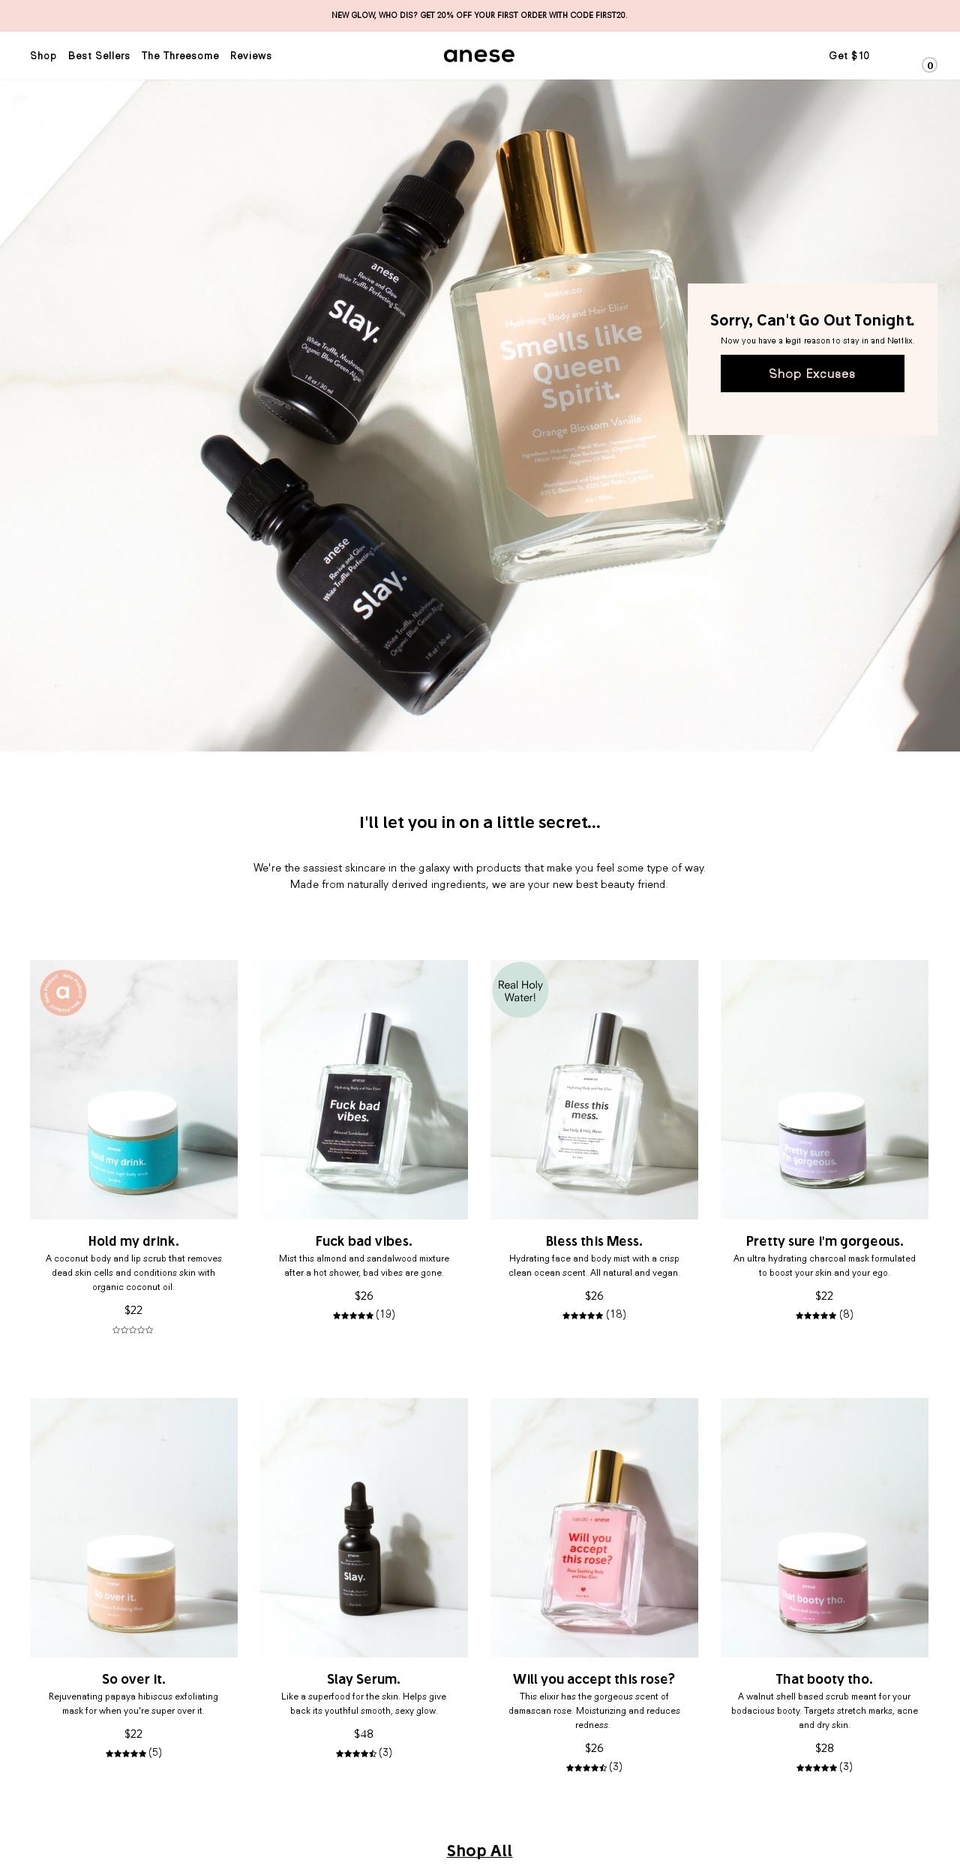 Broadcast Shopify theme site example anese.myshopify.com